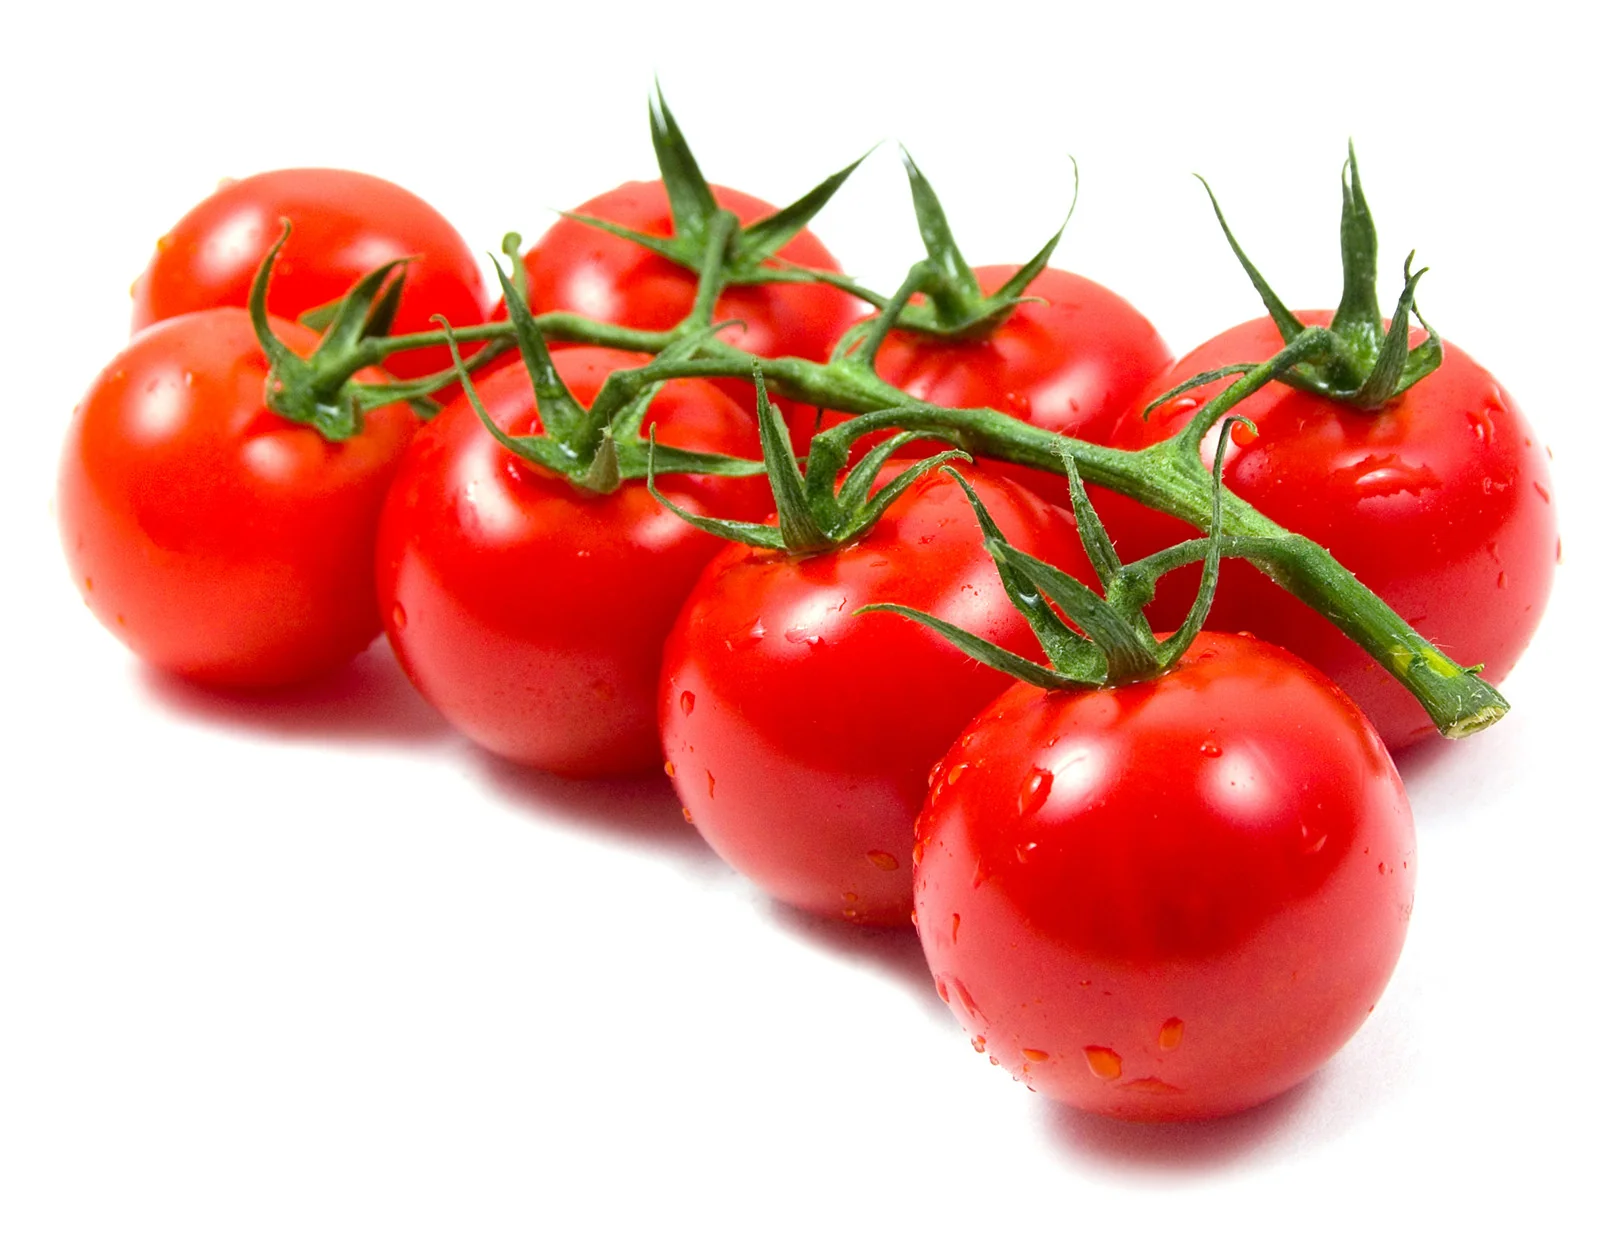 Tomatoes' Benefits for Heart Health